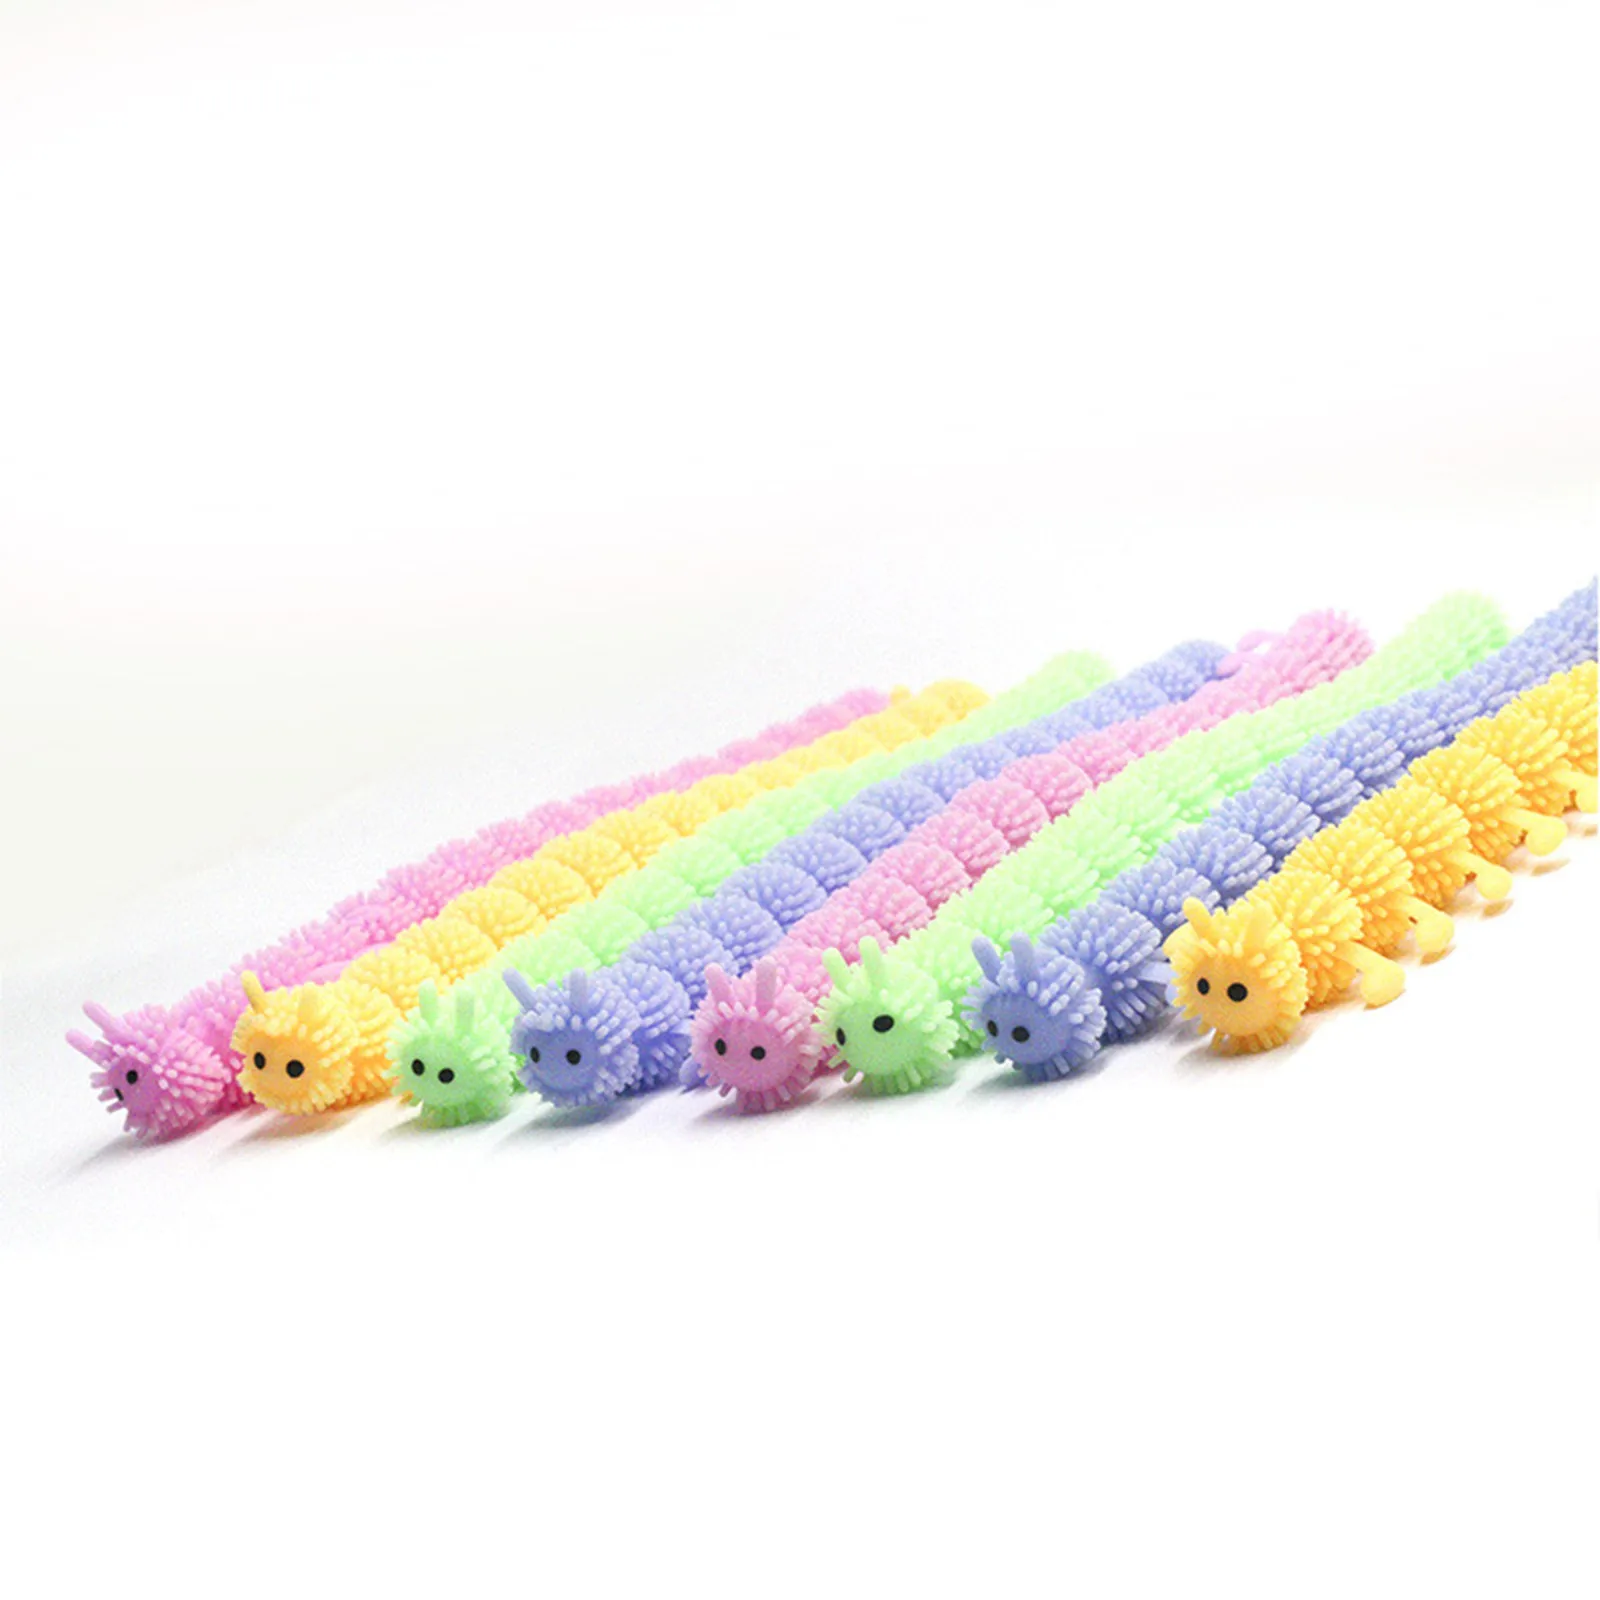 16 Knots Caterpillar Relieves Stress Toy Physiotherapy Releases Stress,to Relieve Pressure Suitable for Children Over 3 Years Old to Play can Fall can Squeeze Relieve Pressure Pink 